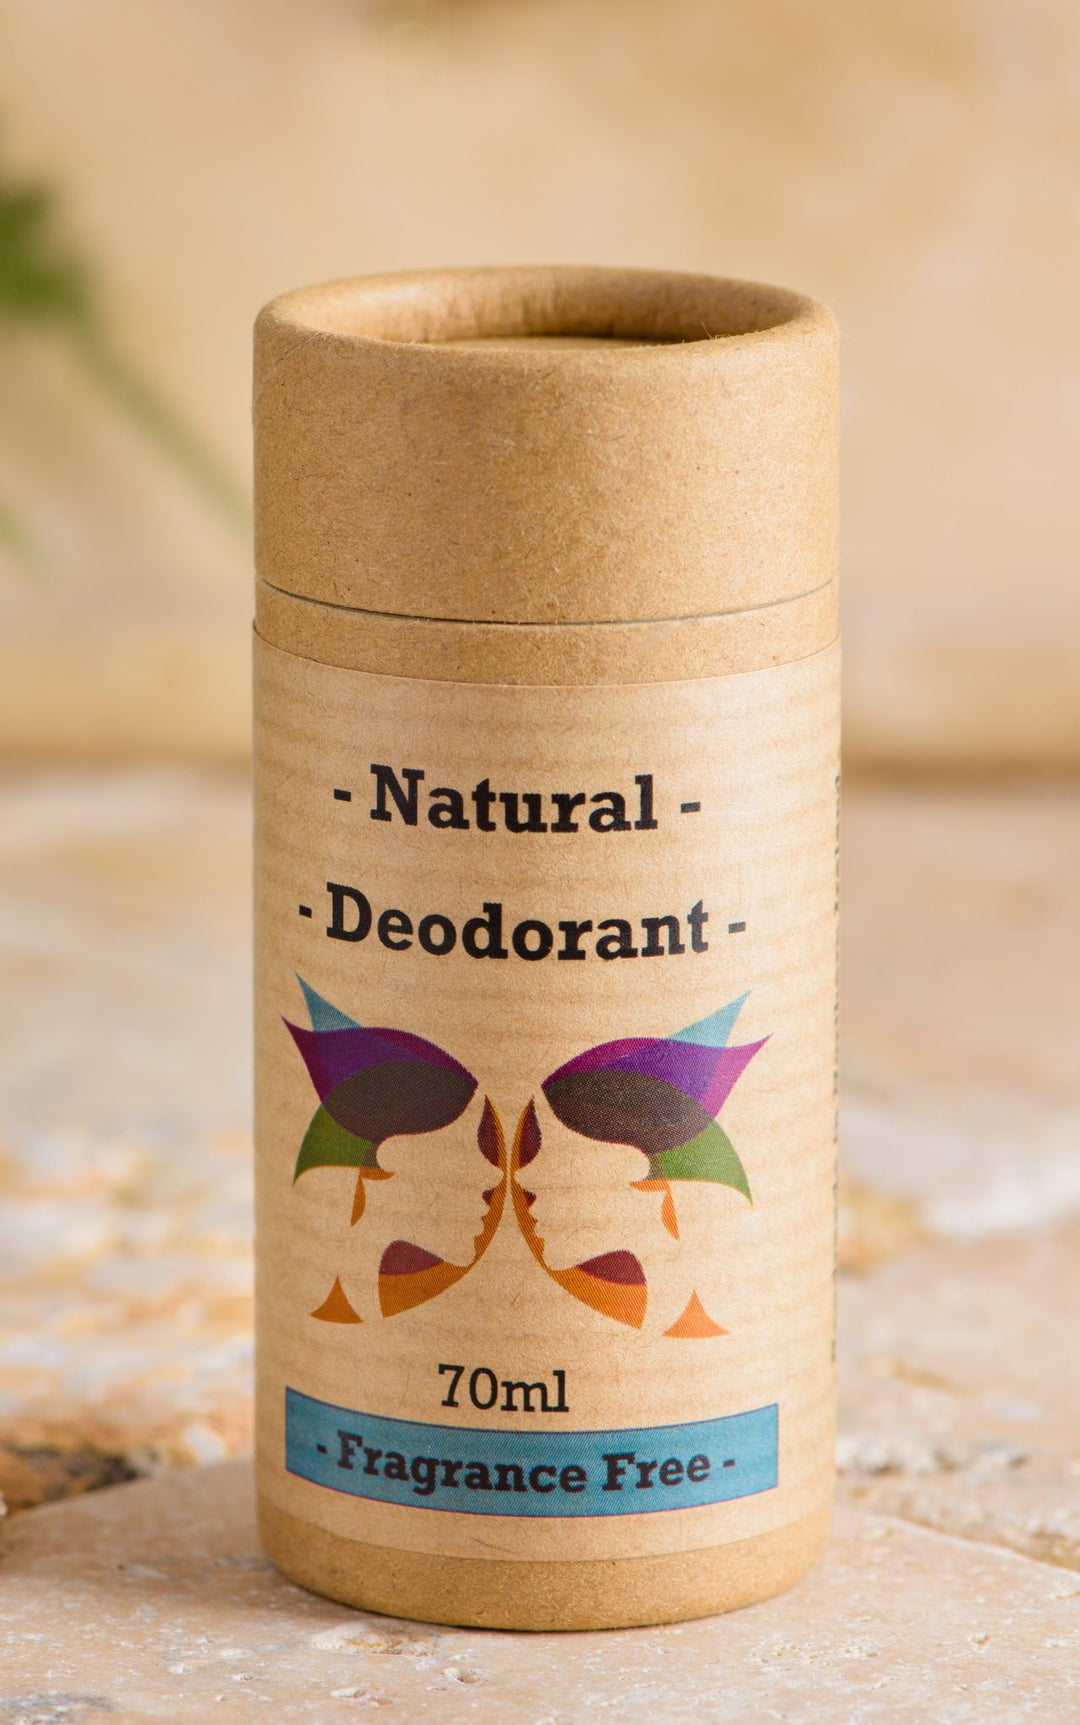 Natural Deodorant - Fragrance Free The Secret Day Spa